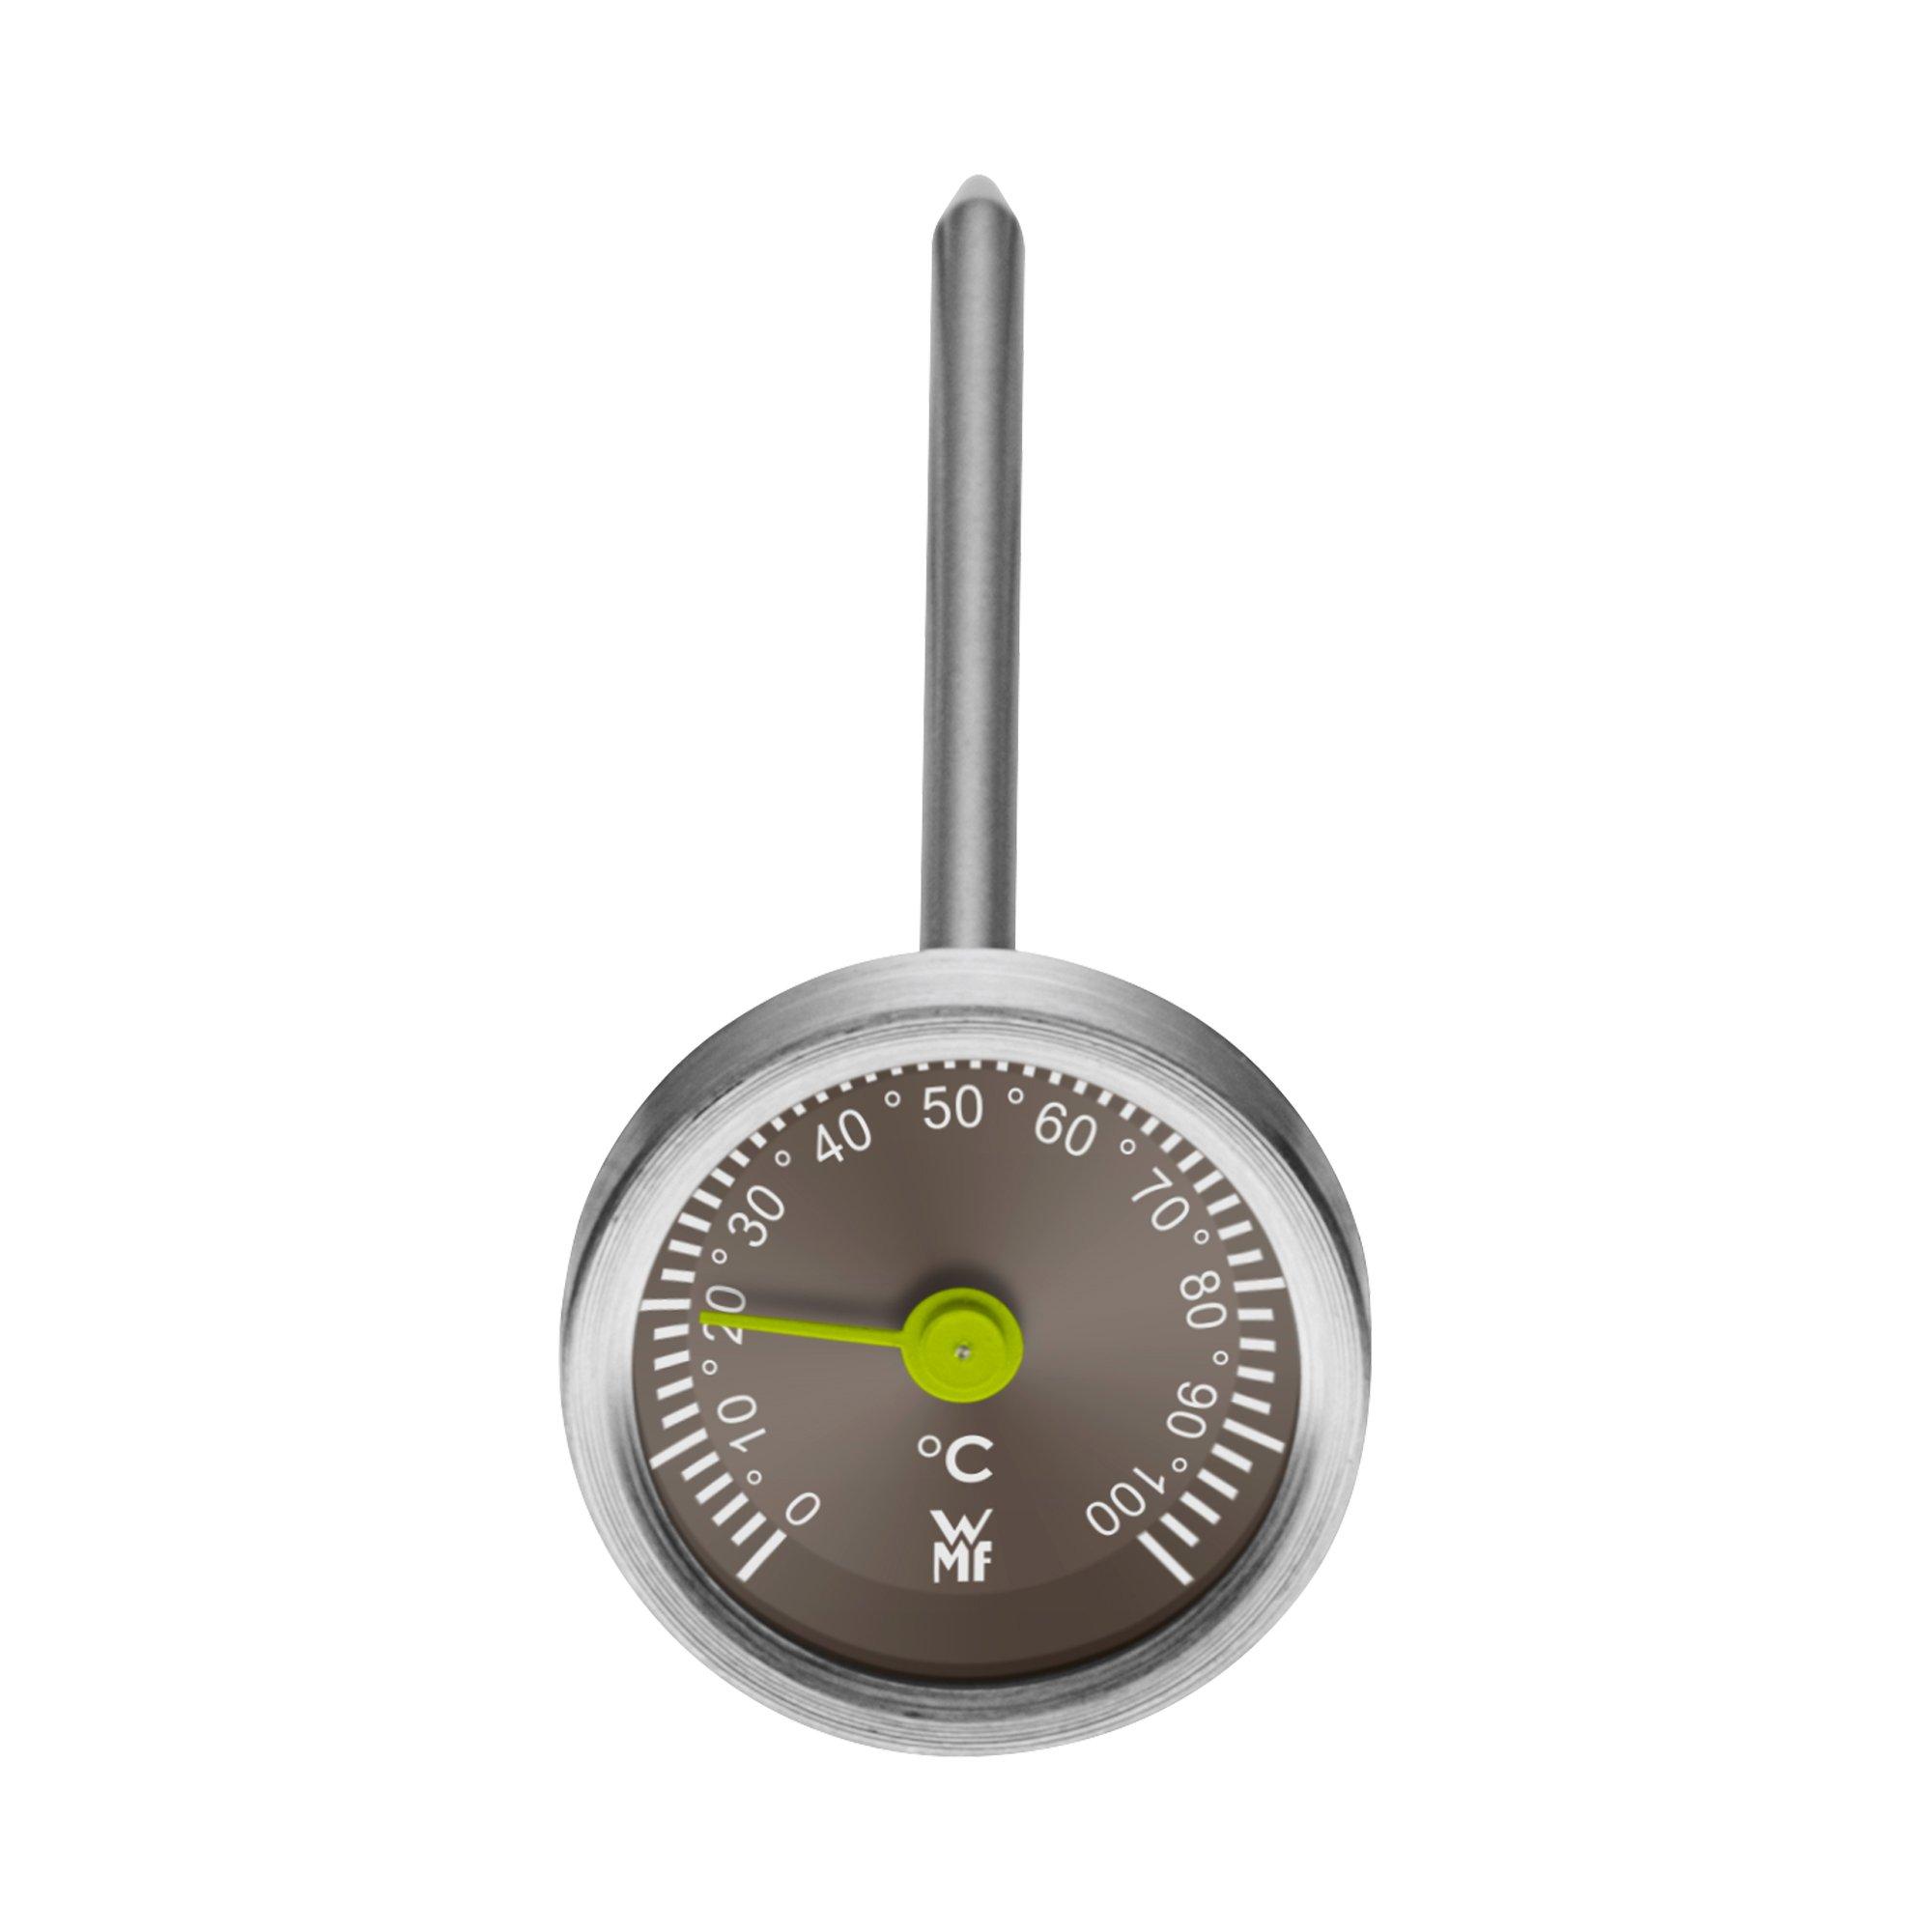 Image of WMF Analoges Bratenthermometer Instant